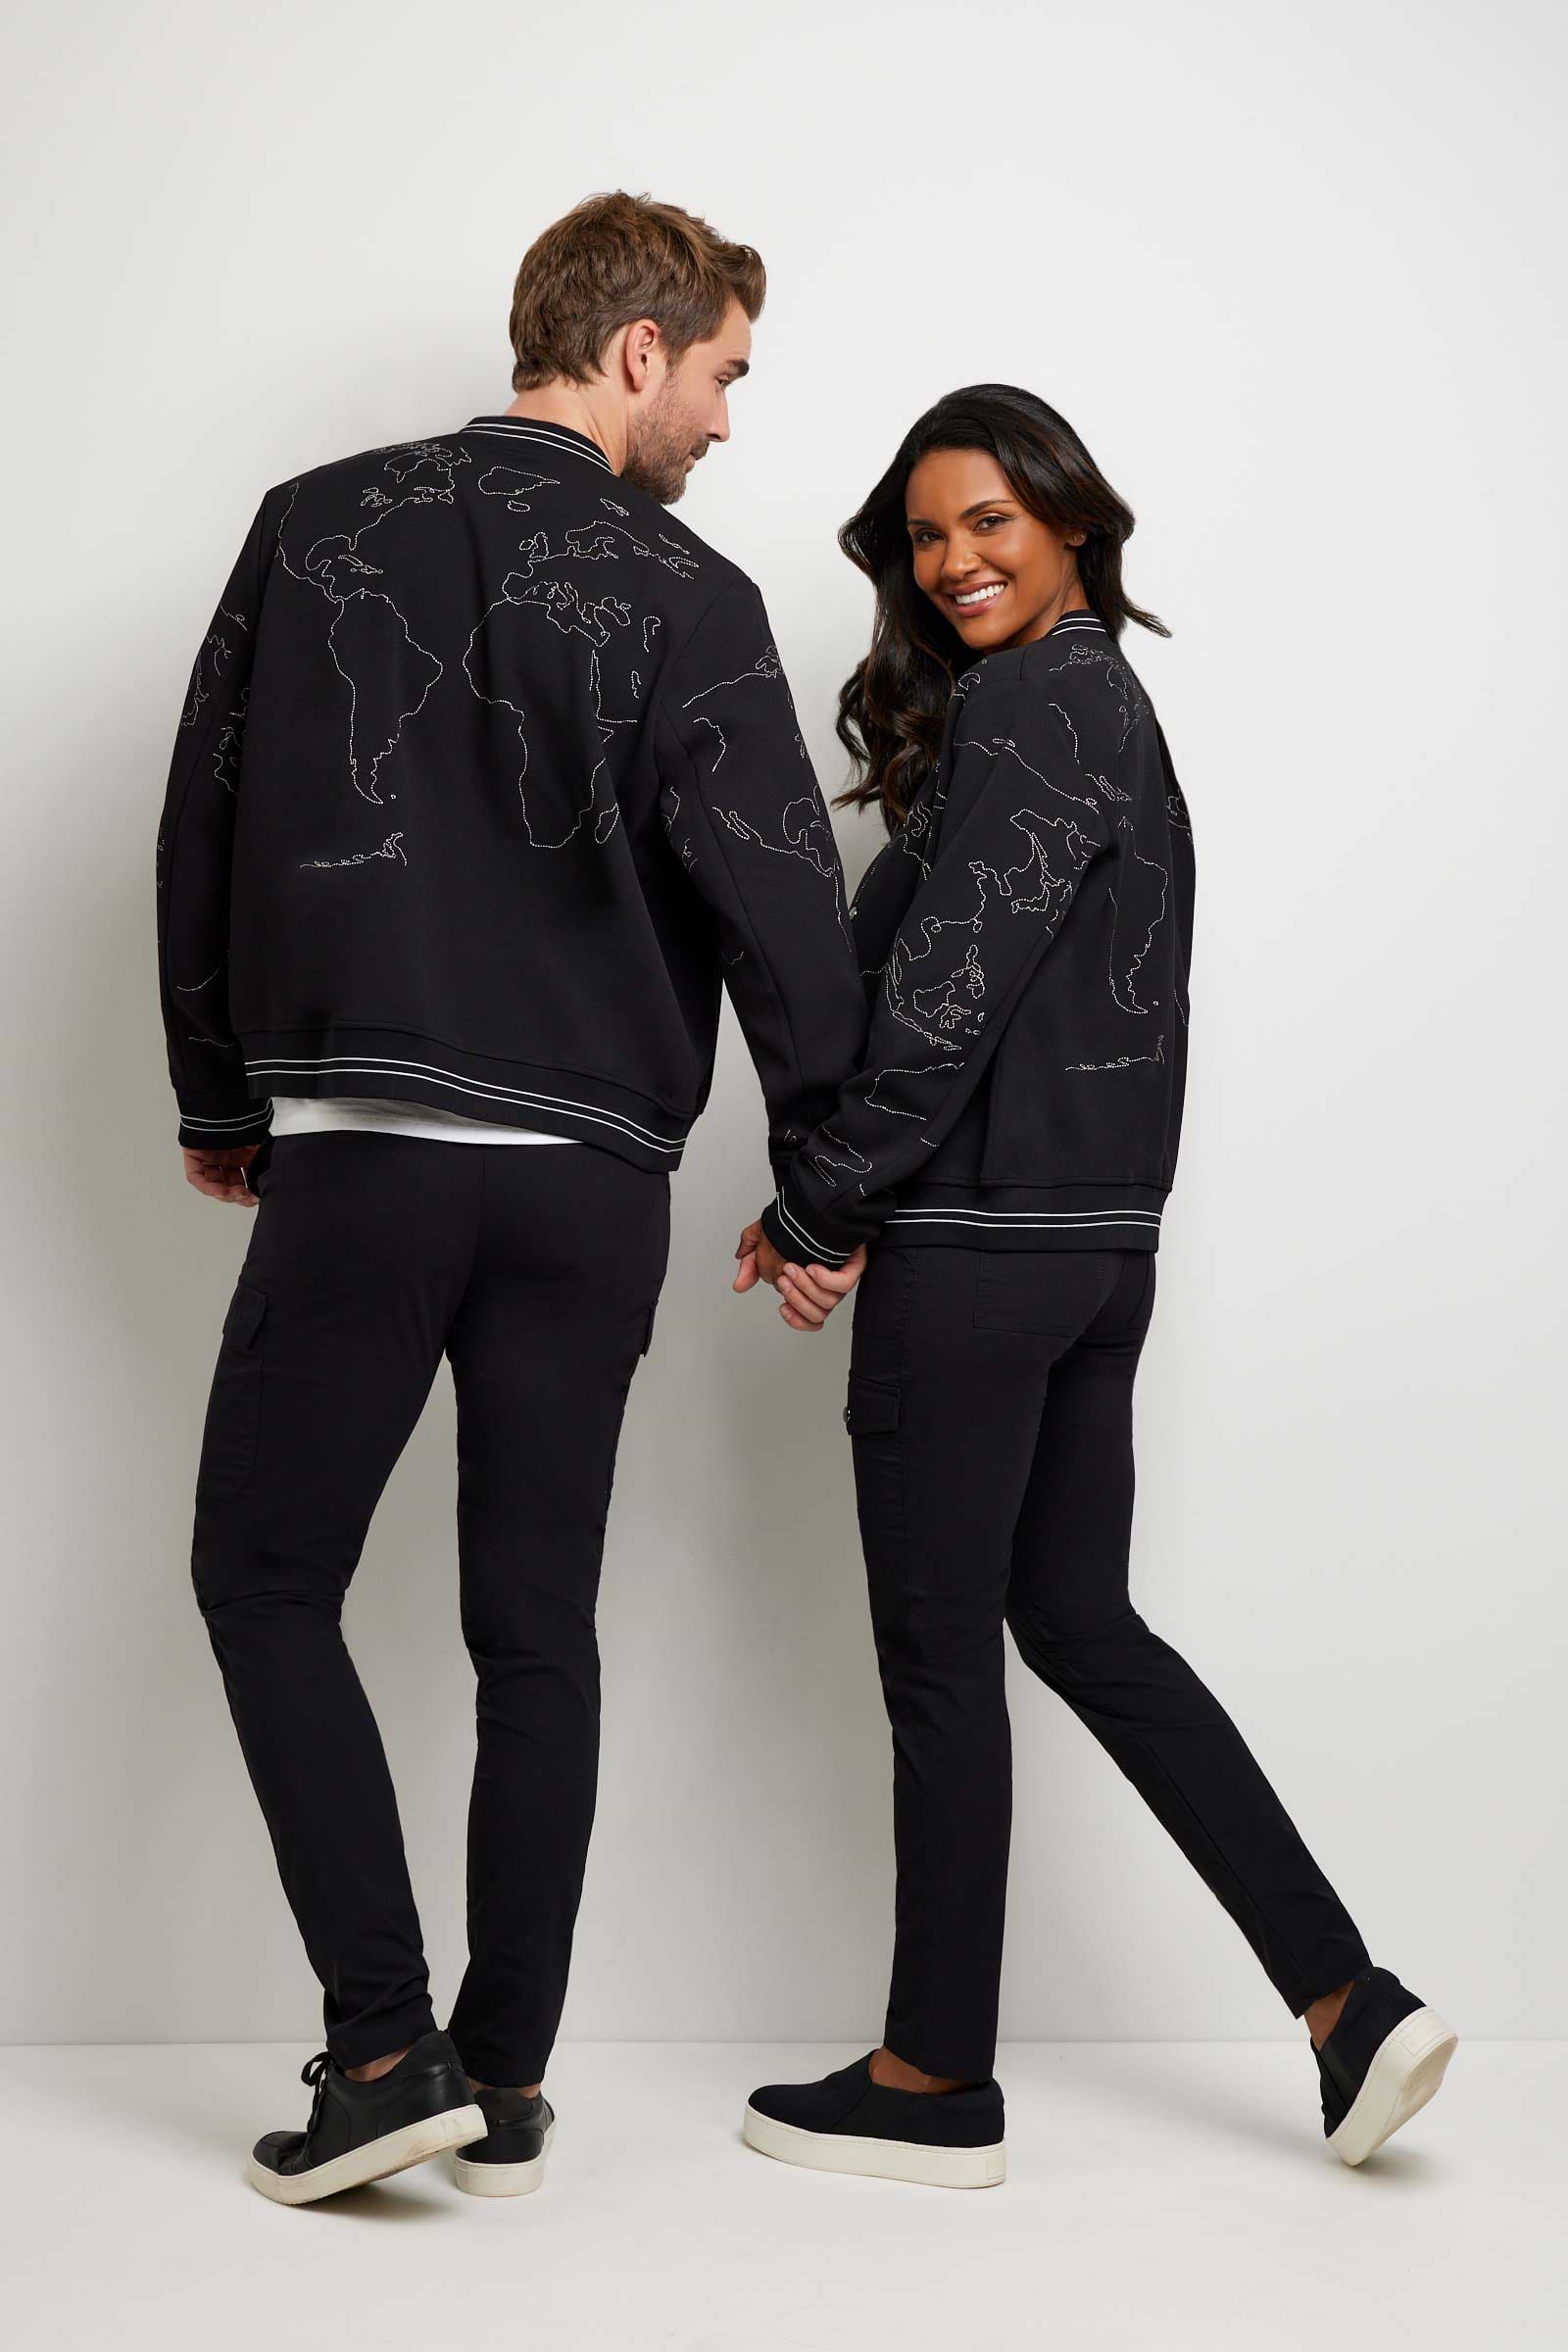 The Best Travel Jacket. Man and Woman Showing the Back Profile of a Map Bomber Jacket in Black.